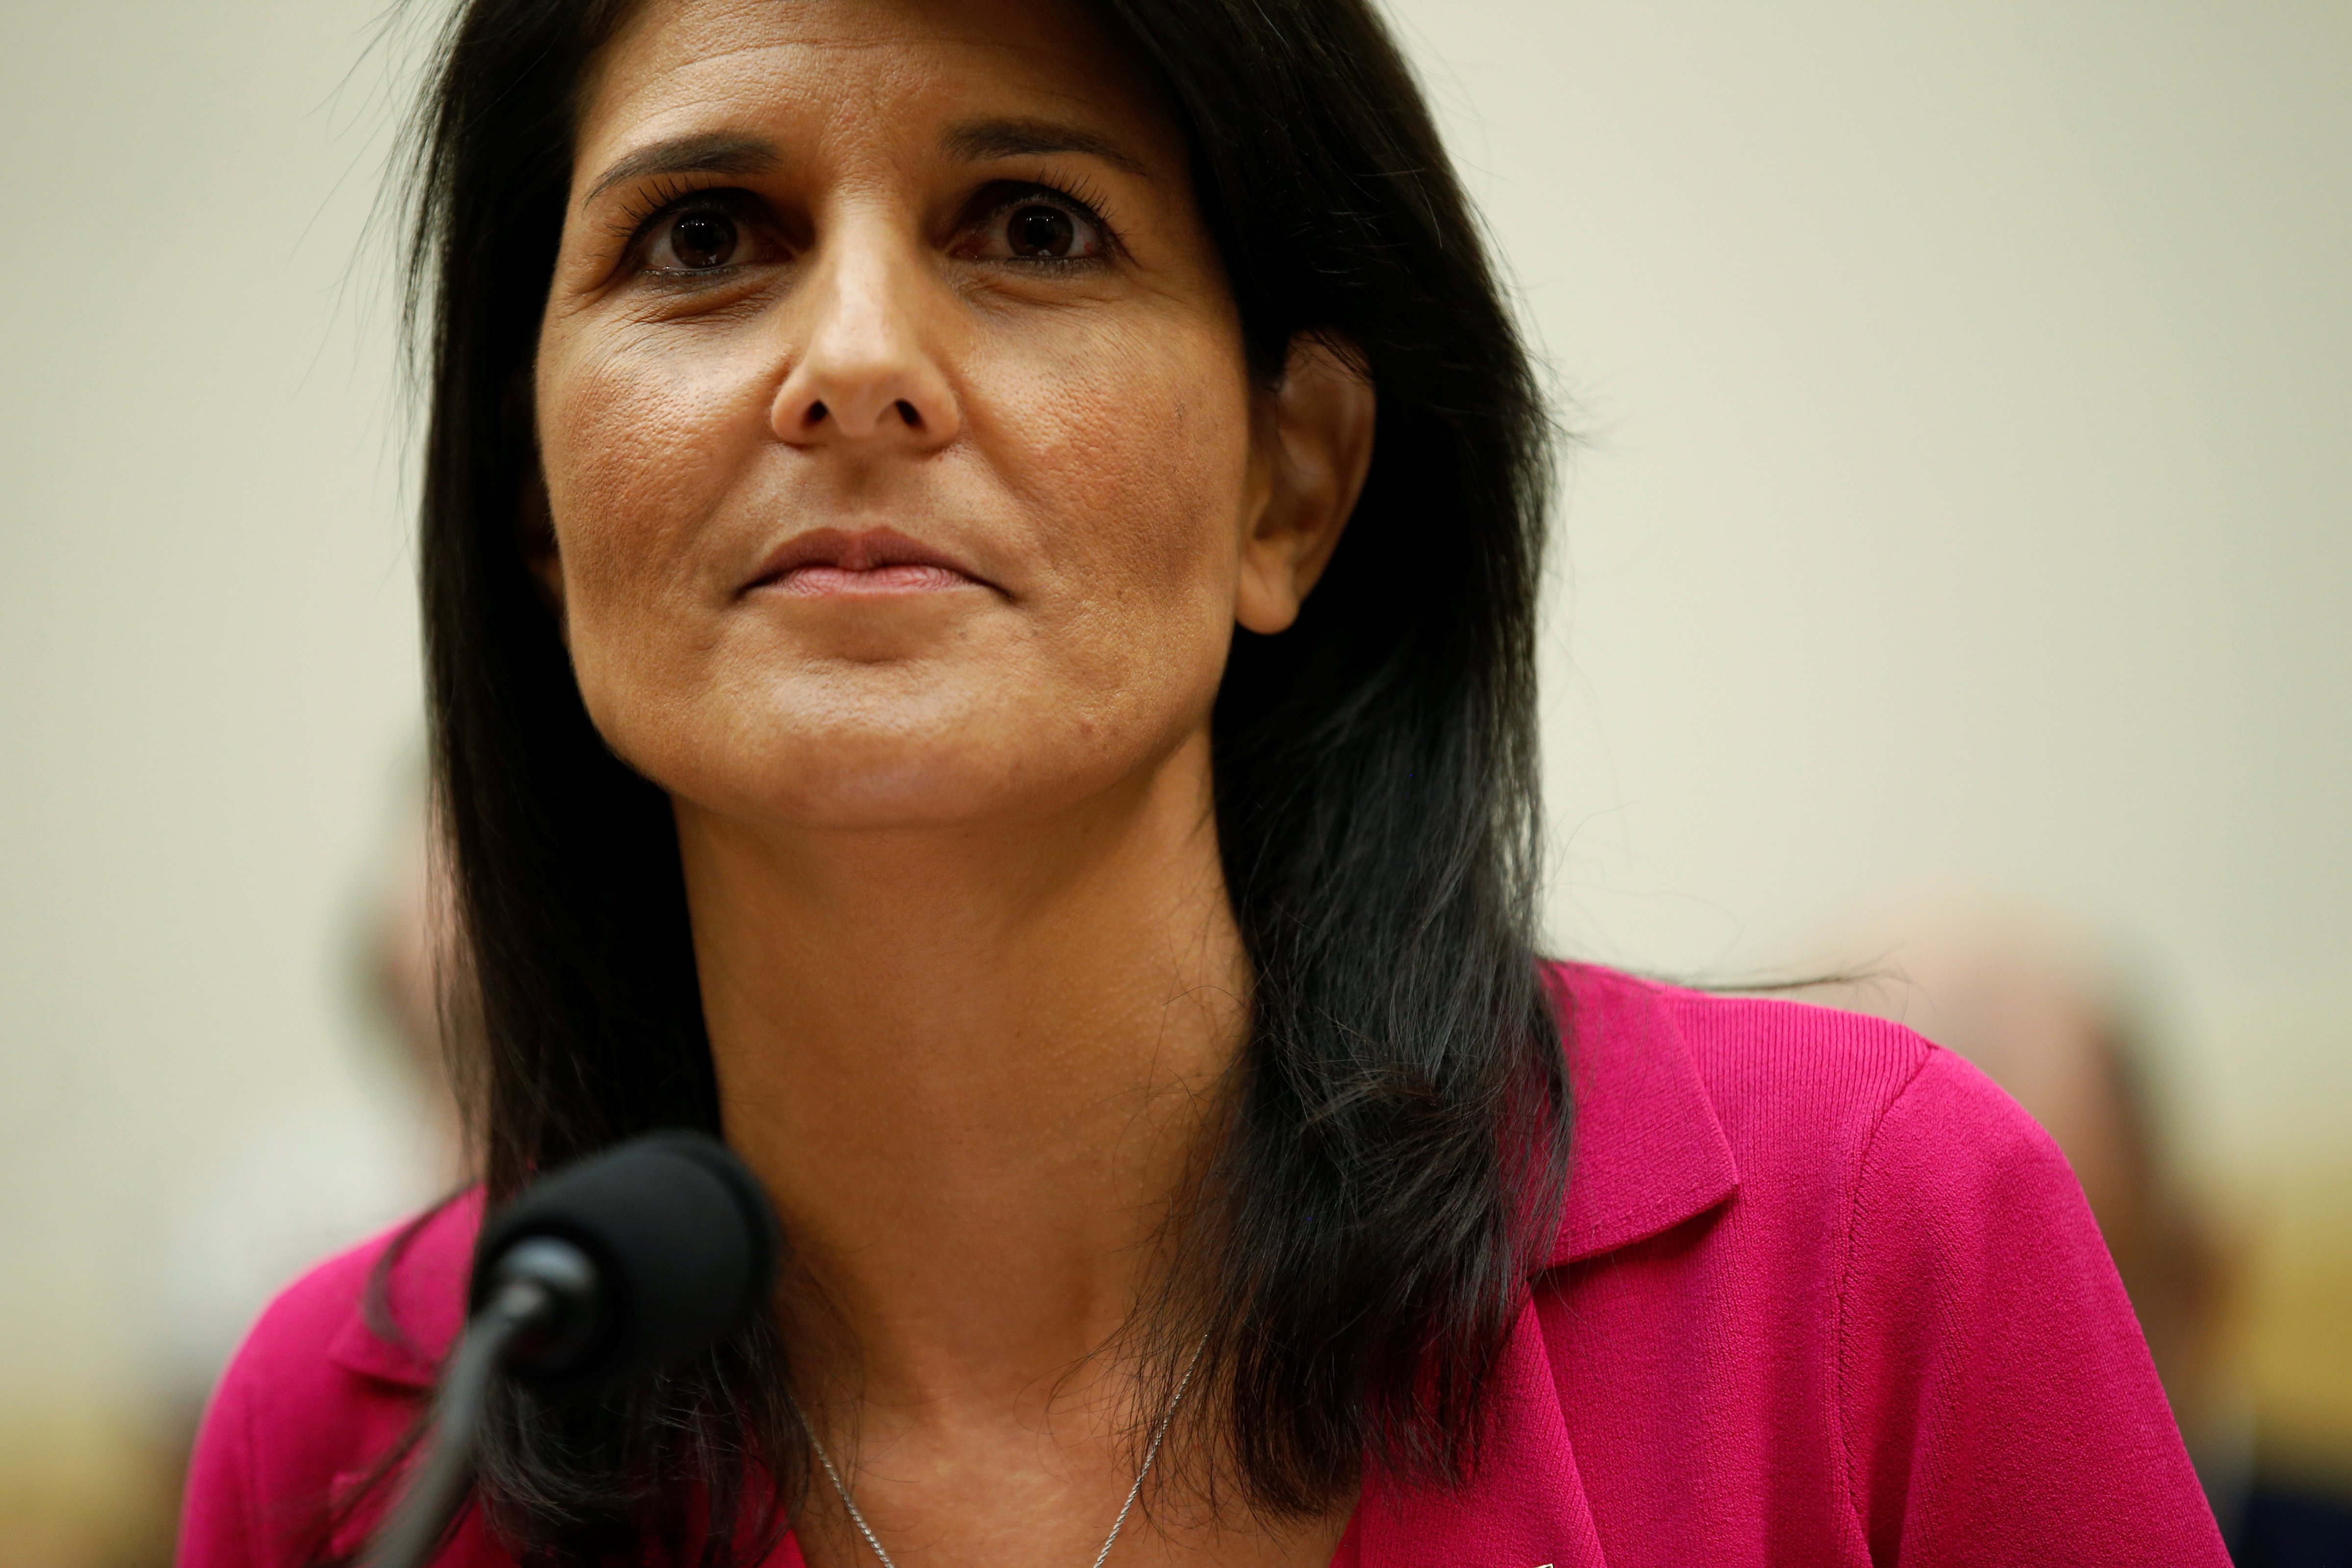 U.S. Ambassador to the United Nations Nikki Haley testifies to the House Foreign Affairs Committee on "Advancing U.S. Interests at the United Nations" in Washington, U.S., June 28, 2017. (Joshua Roberts—REUTERS)